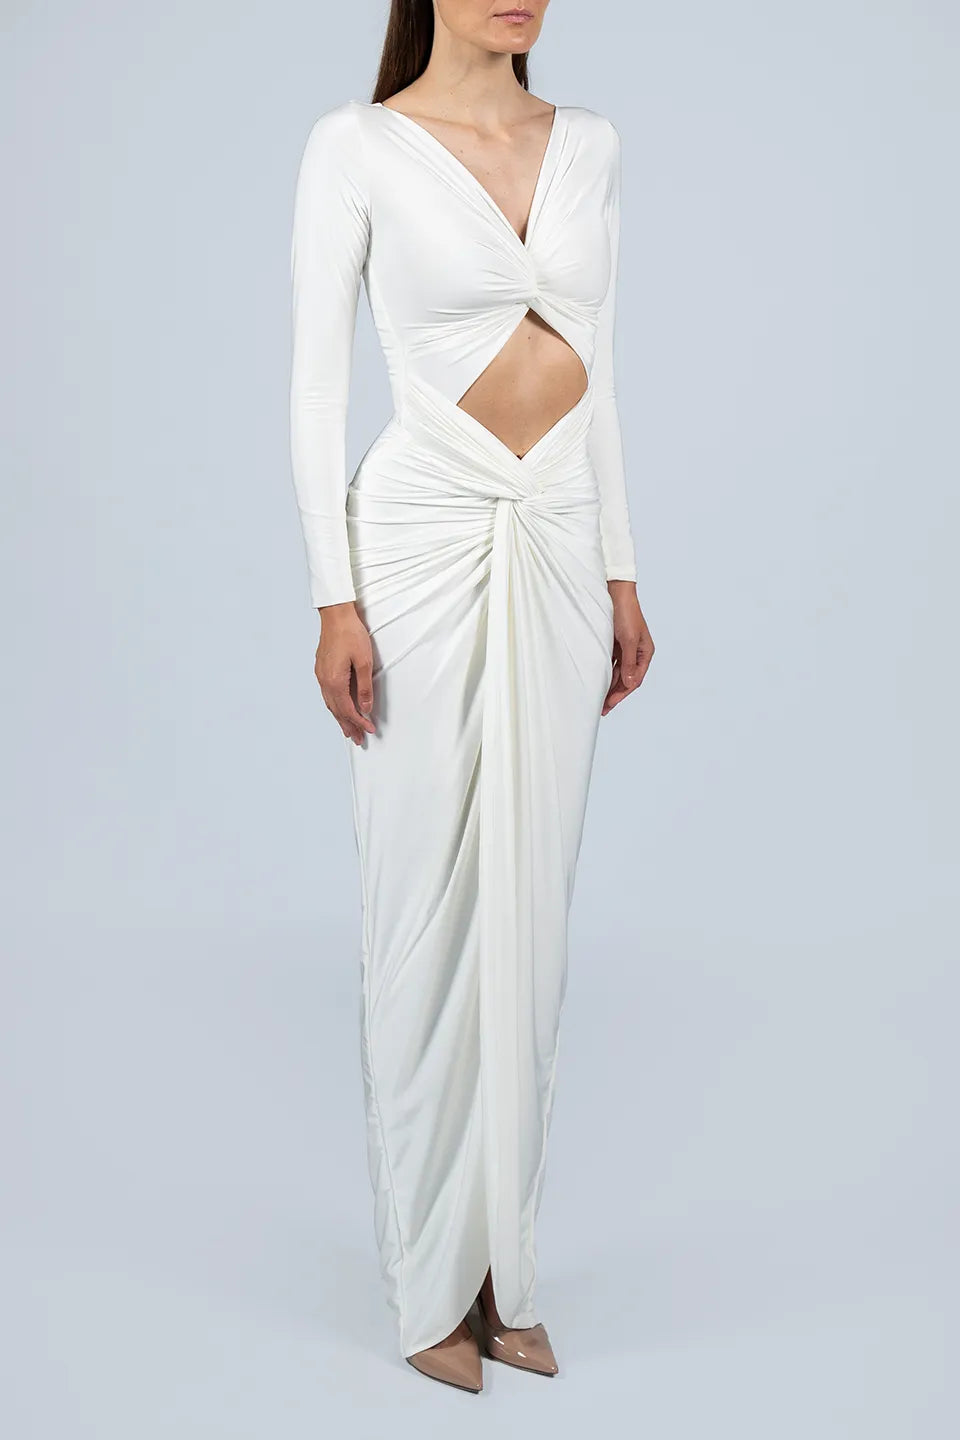 Designer White Maxi dresses, shop online with free delivery in UAE. Product gallery 4